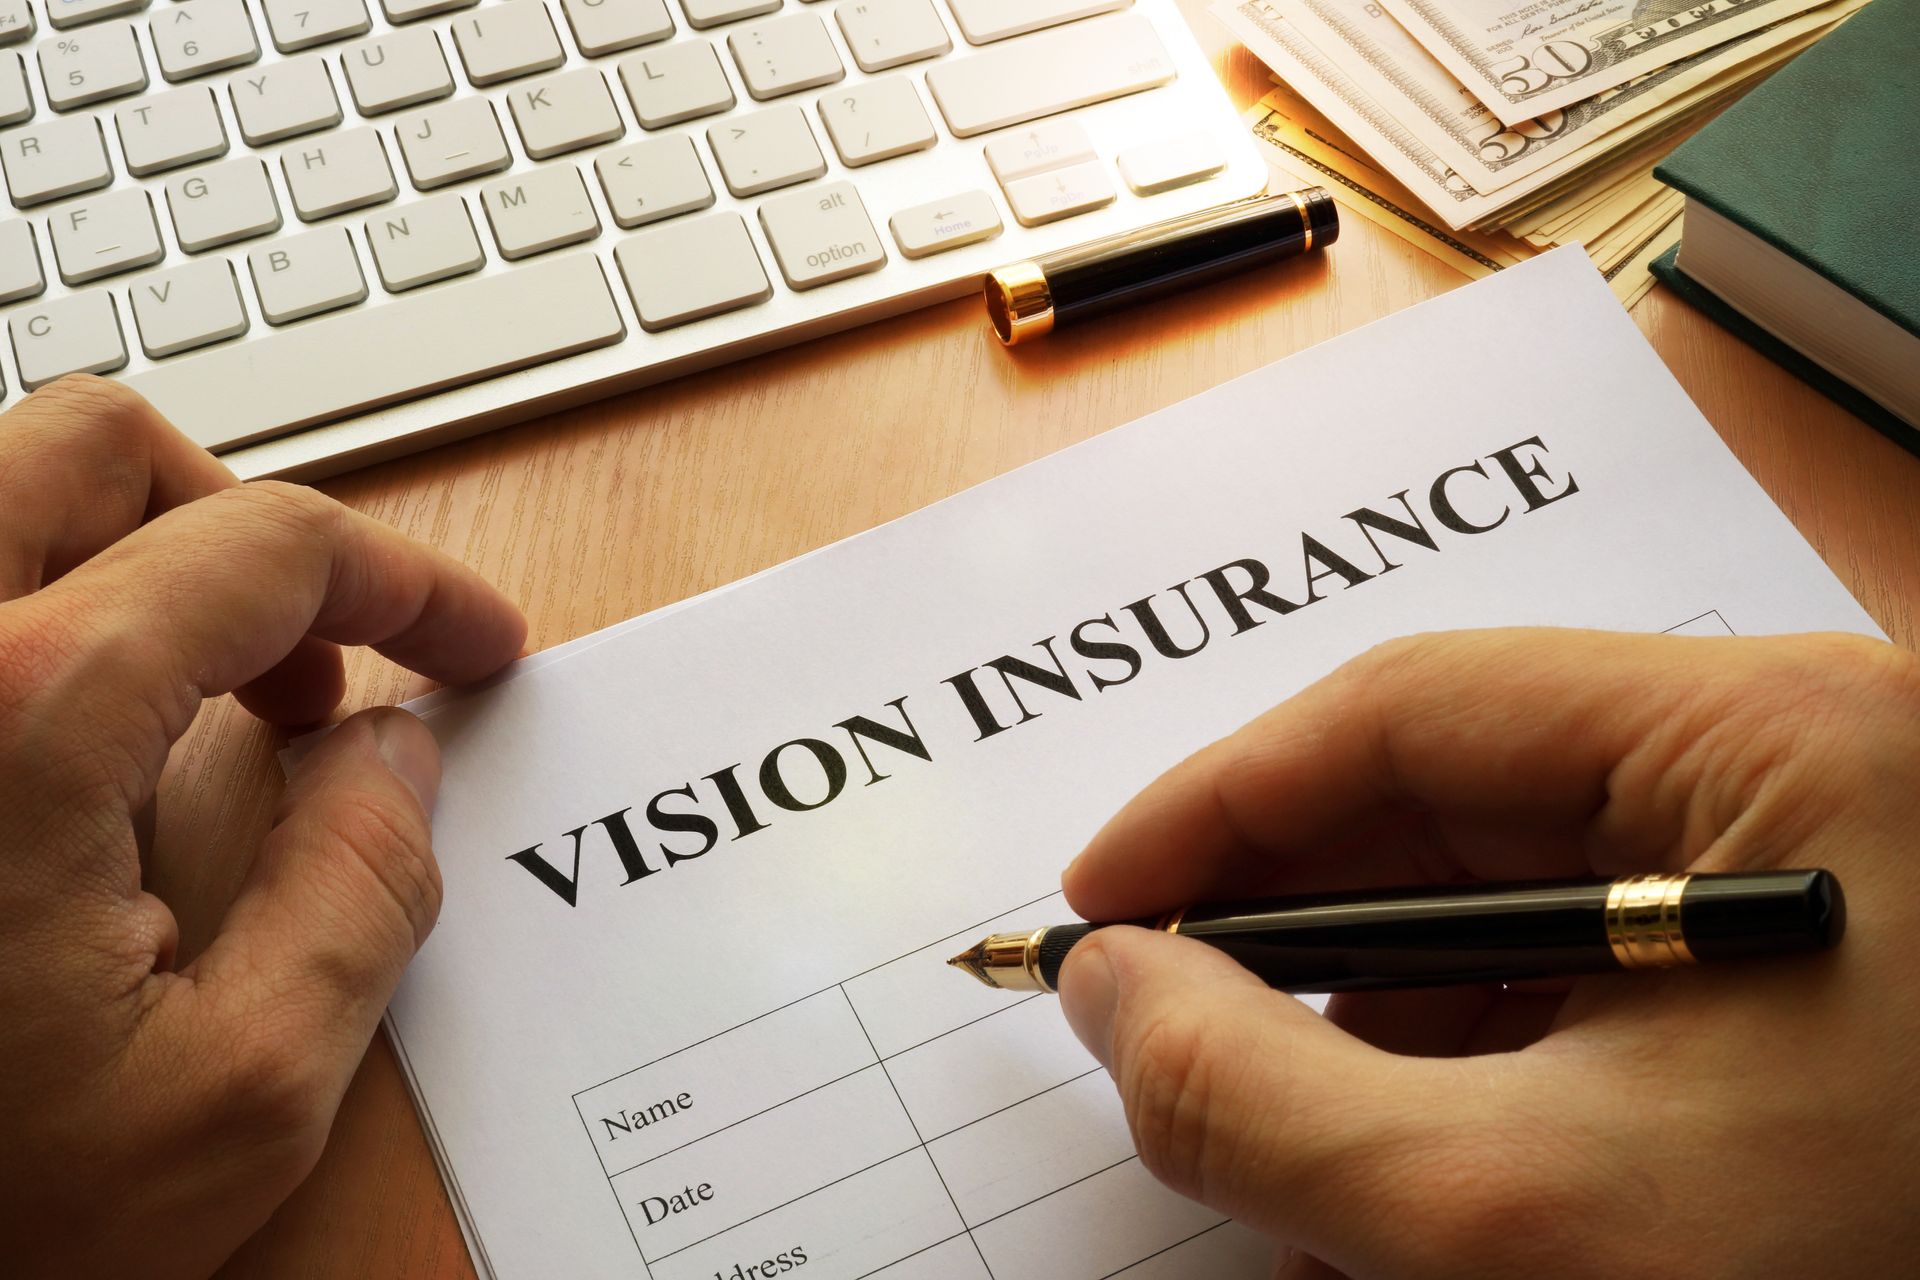 A person is filling out a vision insurance form with a pen